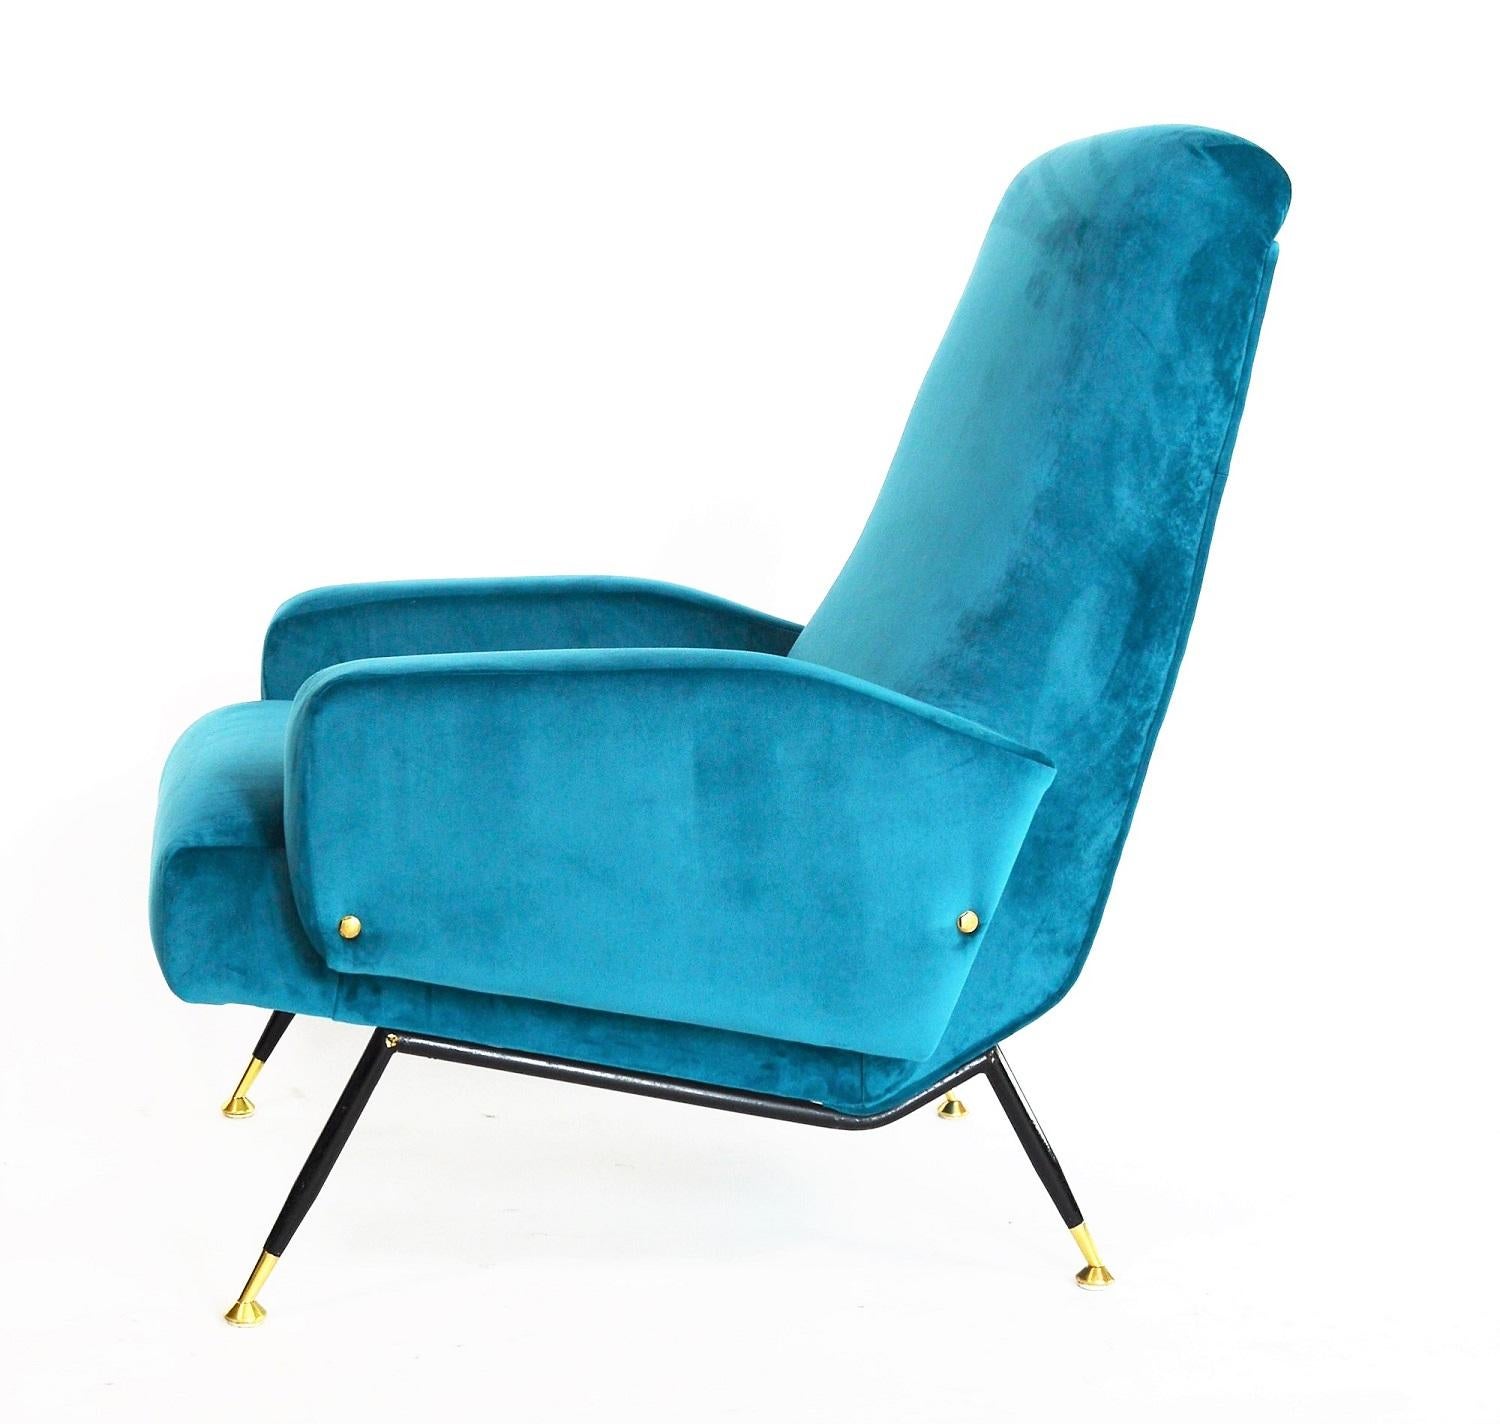 Beautiful and elegant Italian vintage armchair, original from the 1950s.
The armchair have been restored completely internally with high quality material and reupholstered with petrol - blue colored soft velvet fabric of Italian